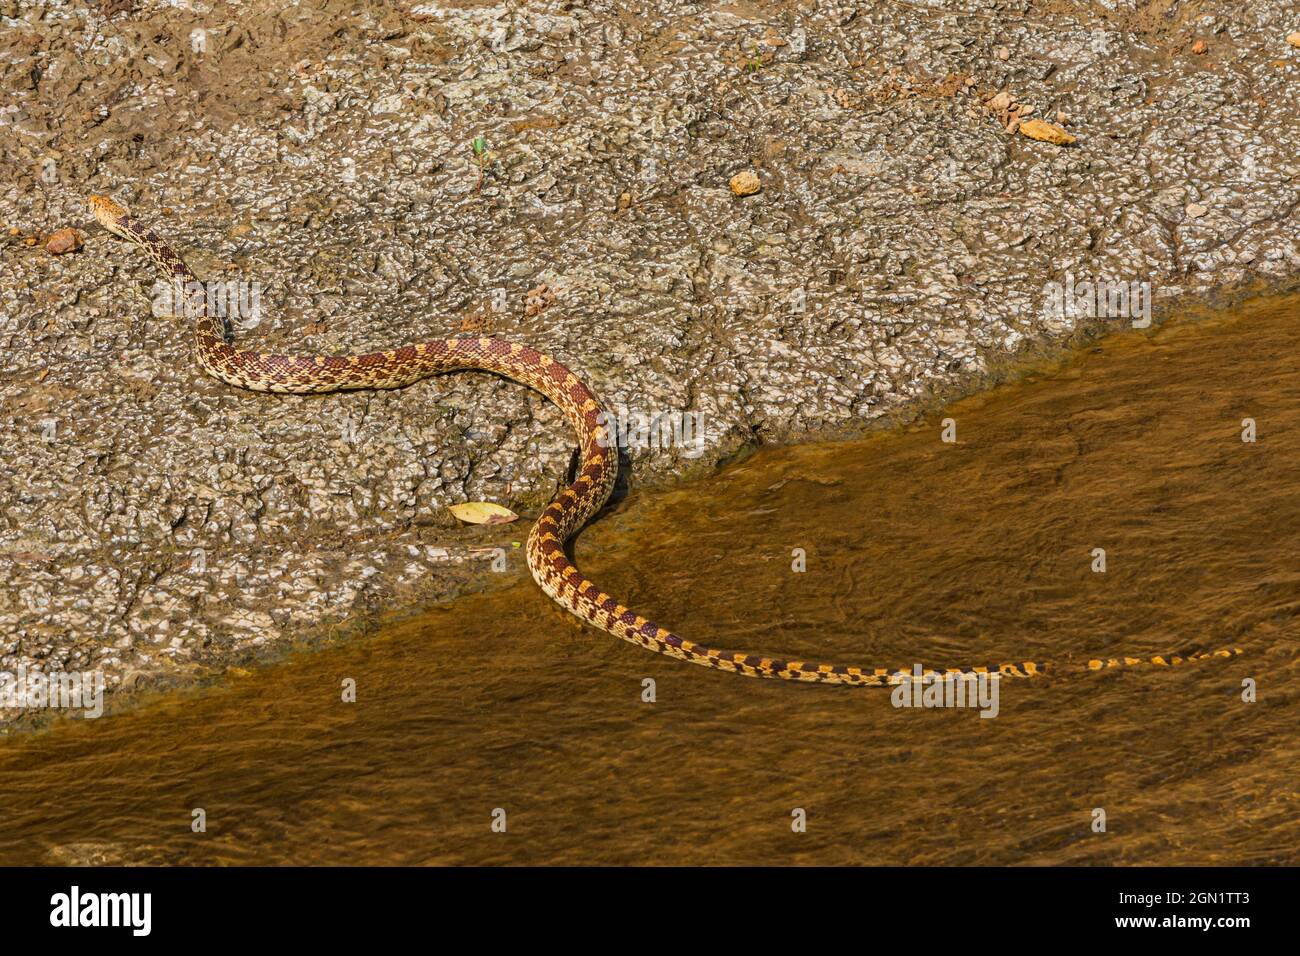 Bullsnake (Pituophis catenifer sayi), crossing a creek, is subspecies of the look-a-like Gopher snake (Pituophis catenifer), Castle Rock CO USA. Stock Photo